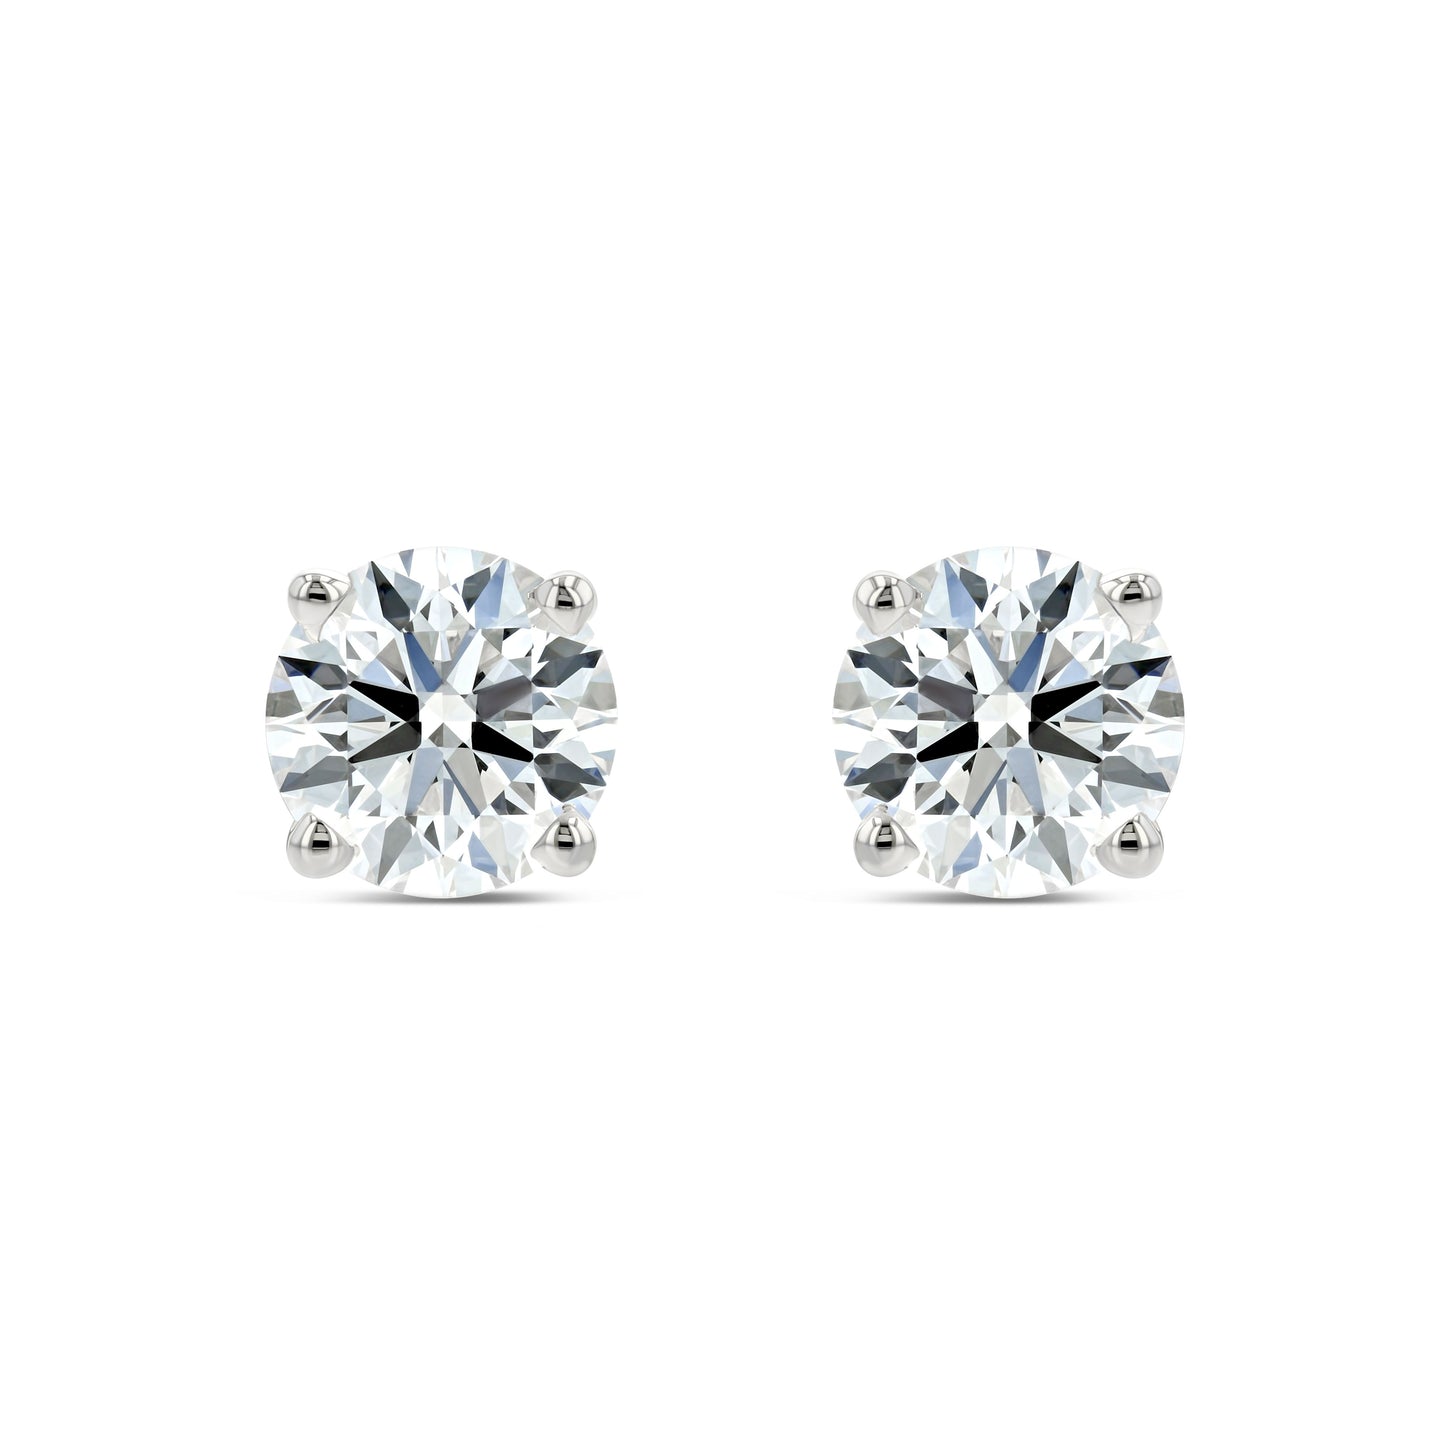 Platinum 4-prong Round Diamond Stud Earrings 1ctw (5.00mm Ea), H Color, Si3-i1 Clarity